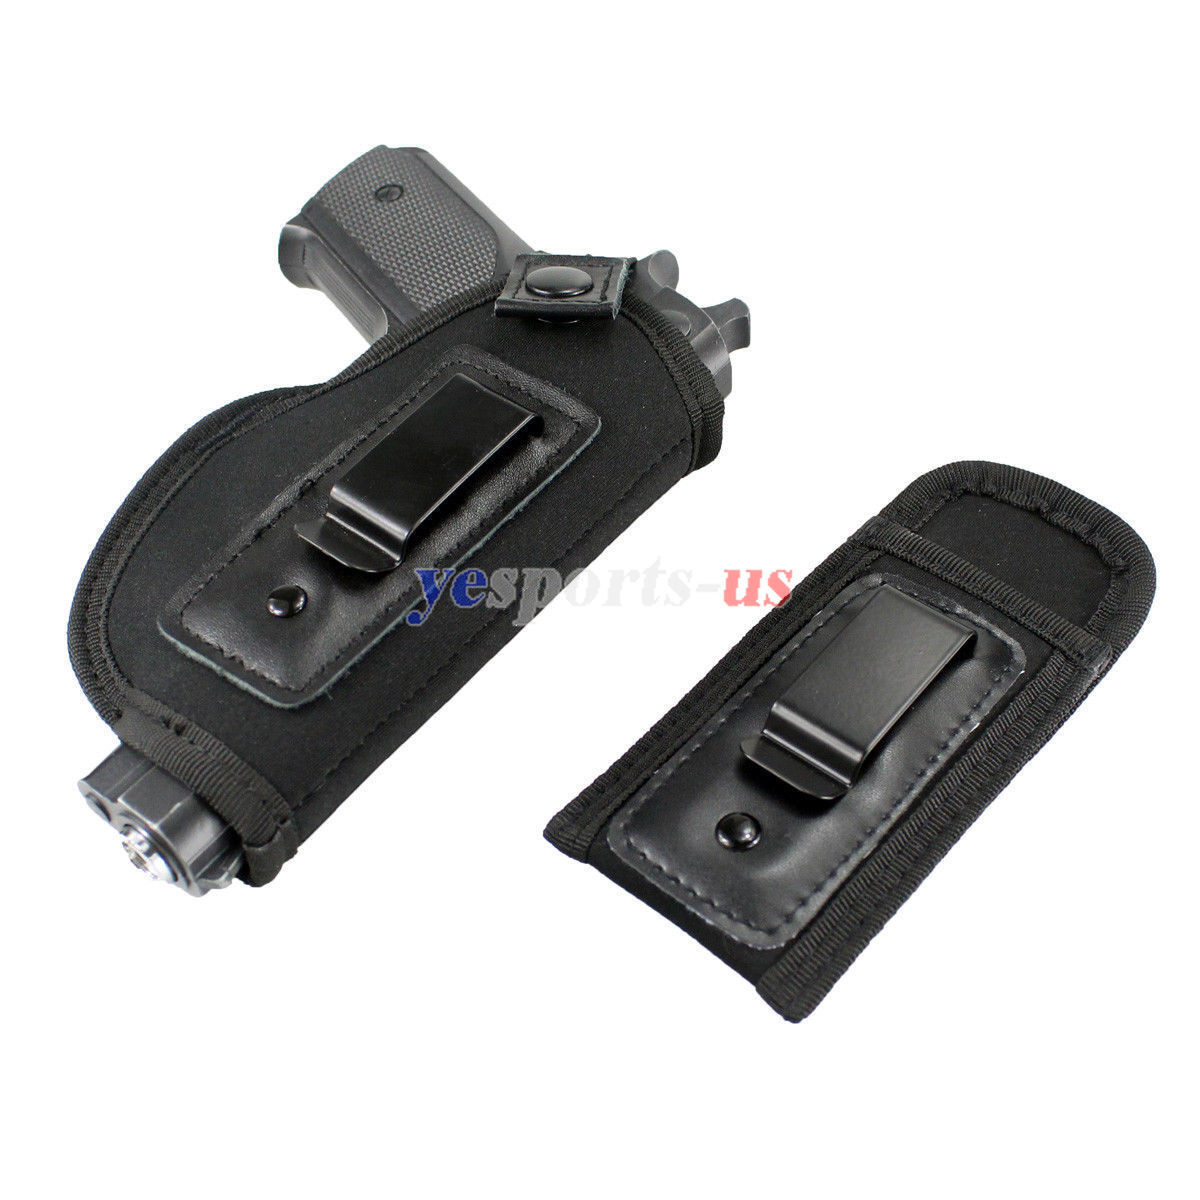 Universal Iwb Holster W/ Extra Mag Pouch